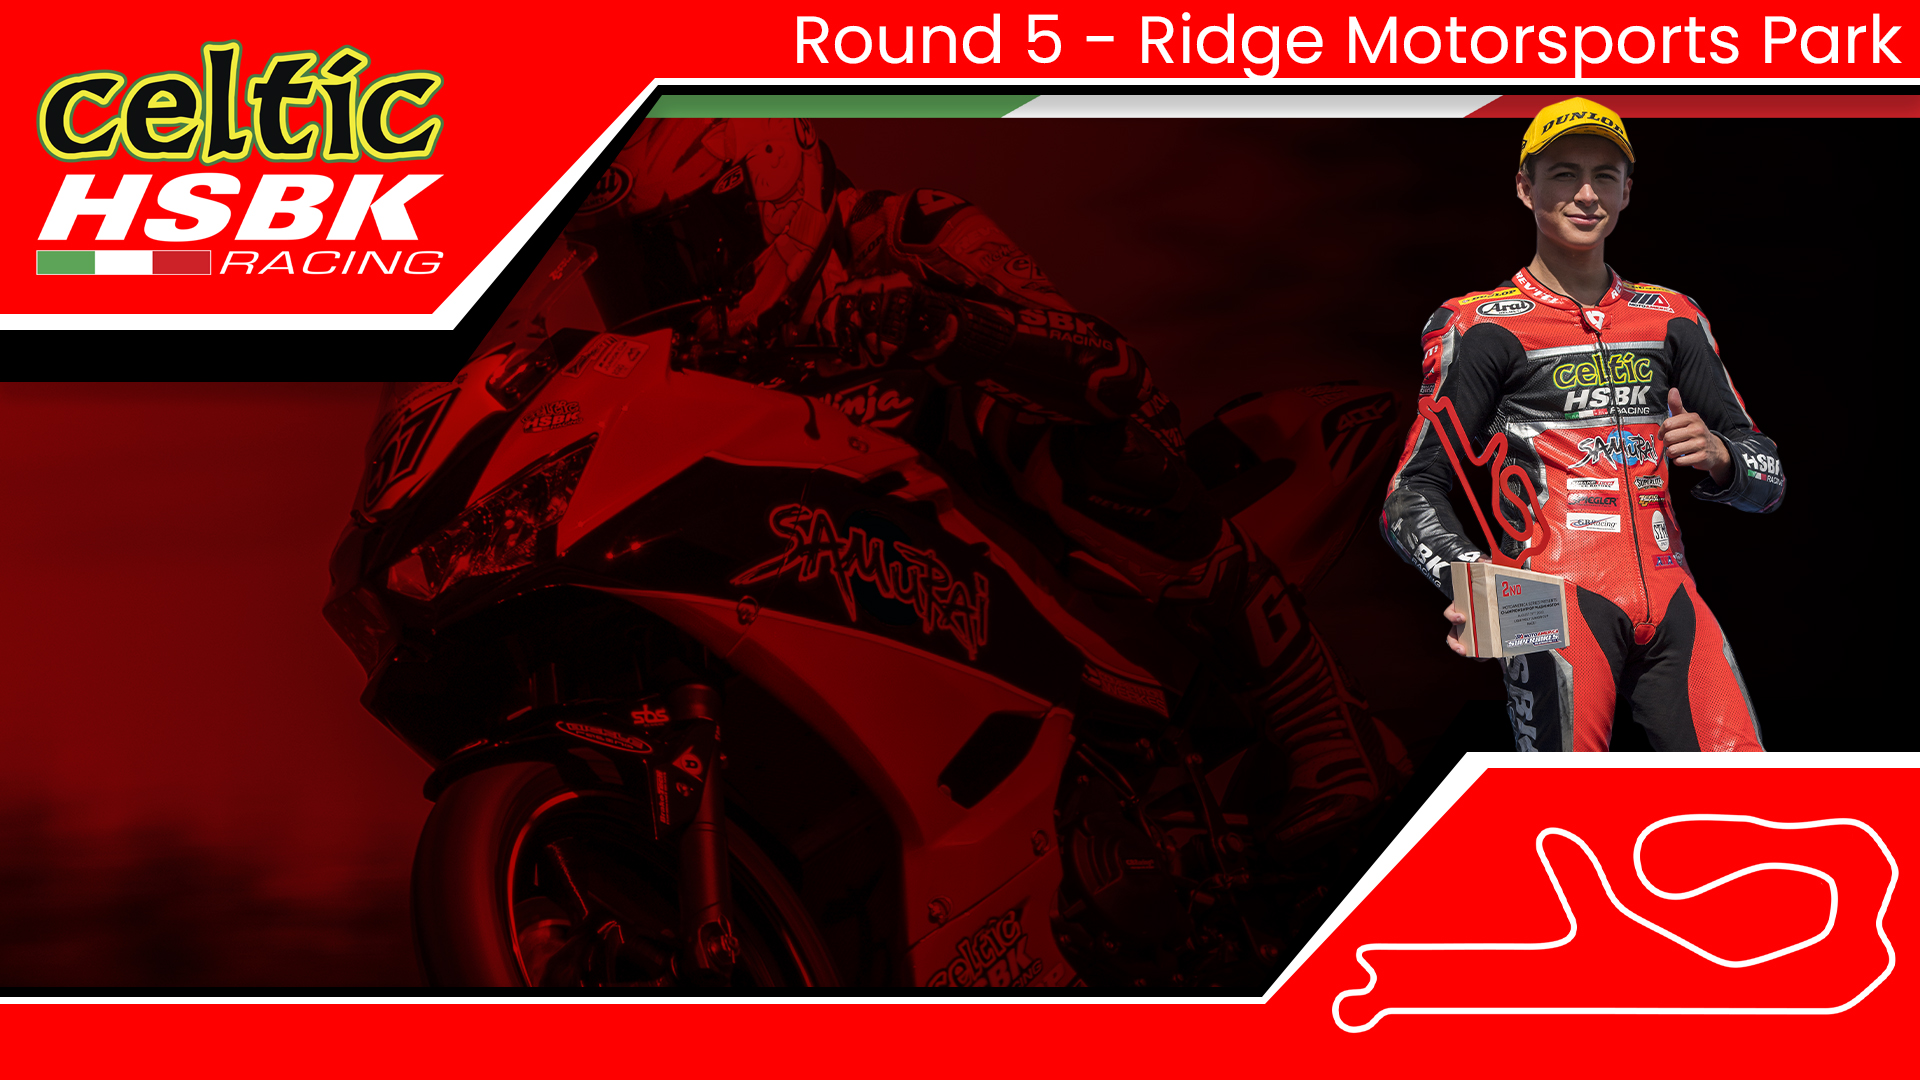 Celtic HSBK Racing Sam Lochoff is ready for the top step at The Ridge (2020 MotoAmerica Round 5)